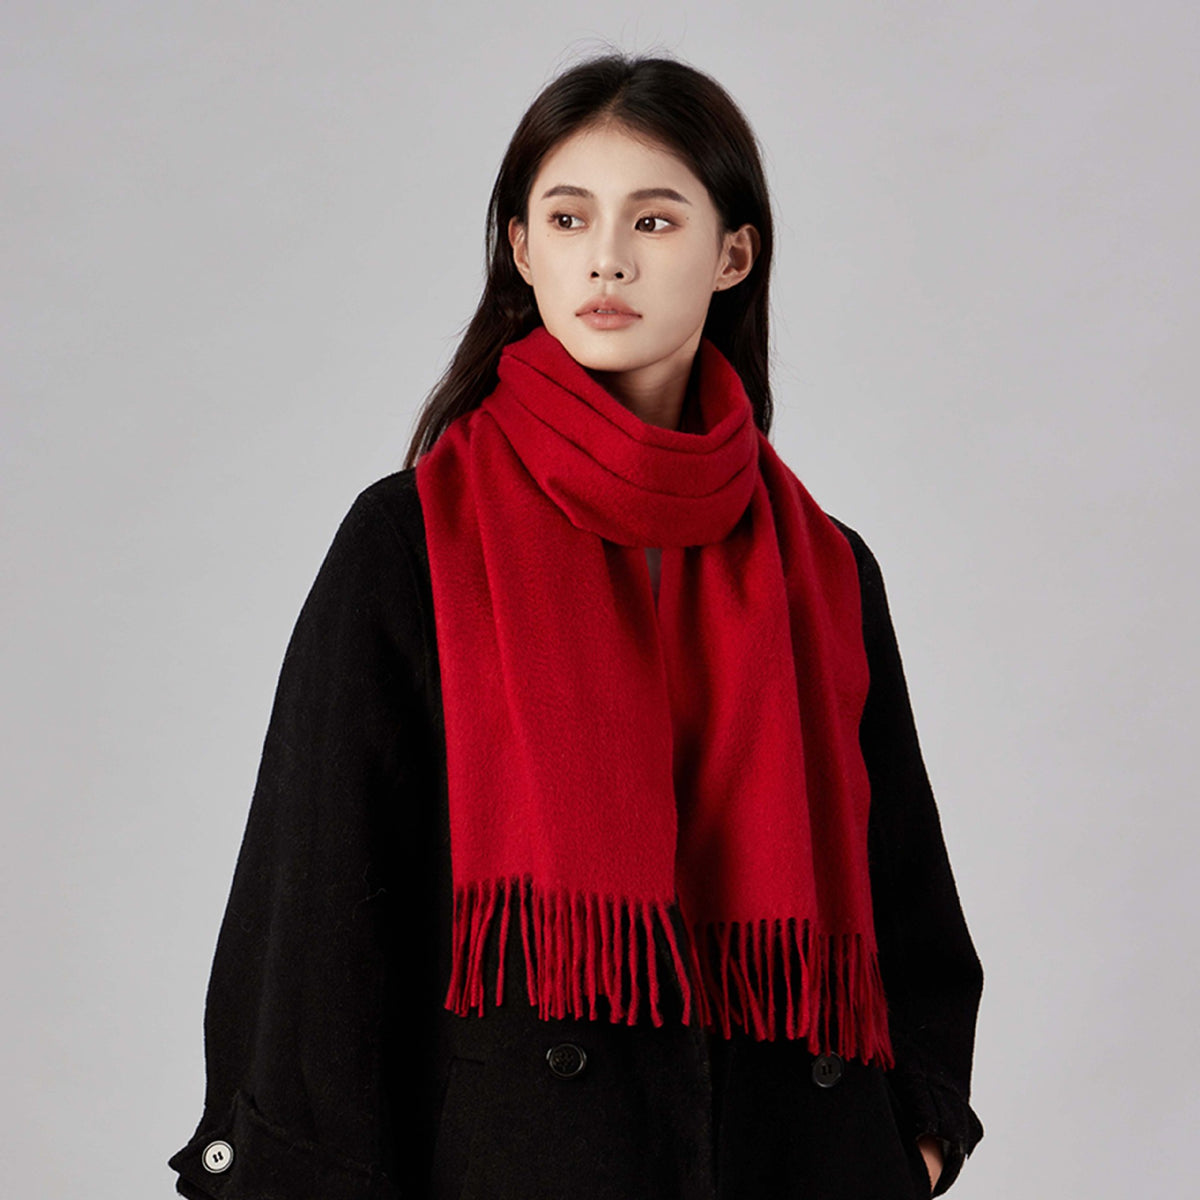 100% Pure Cashmere Versatile Scarf Thickened Shawl for Women